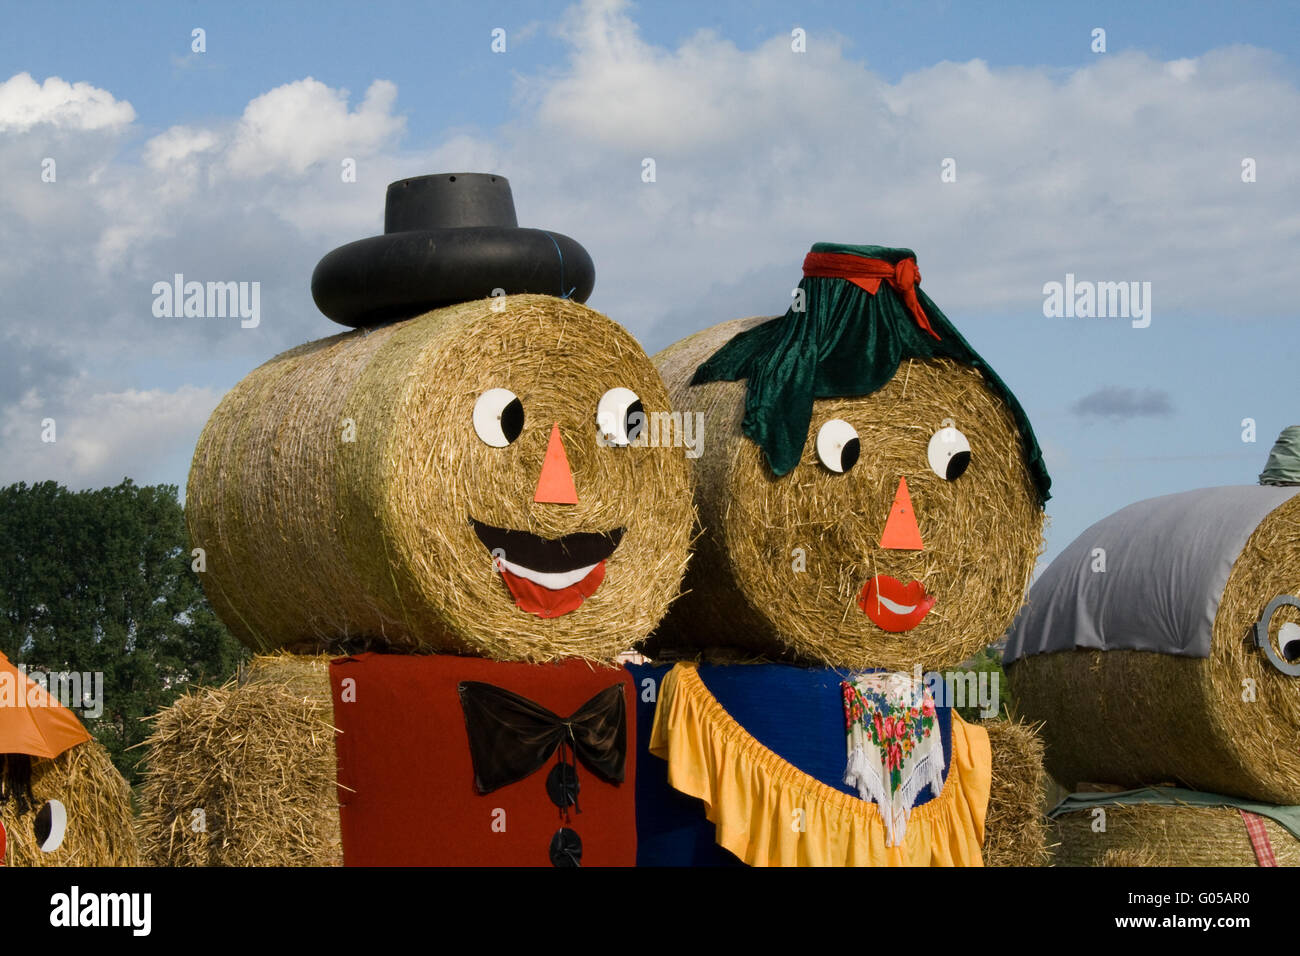 Two figures made out of straw bales Stock Photo